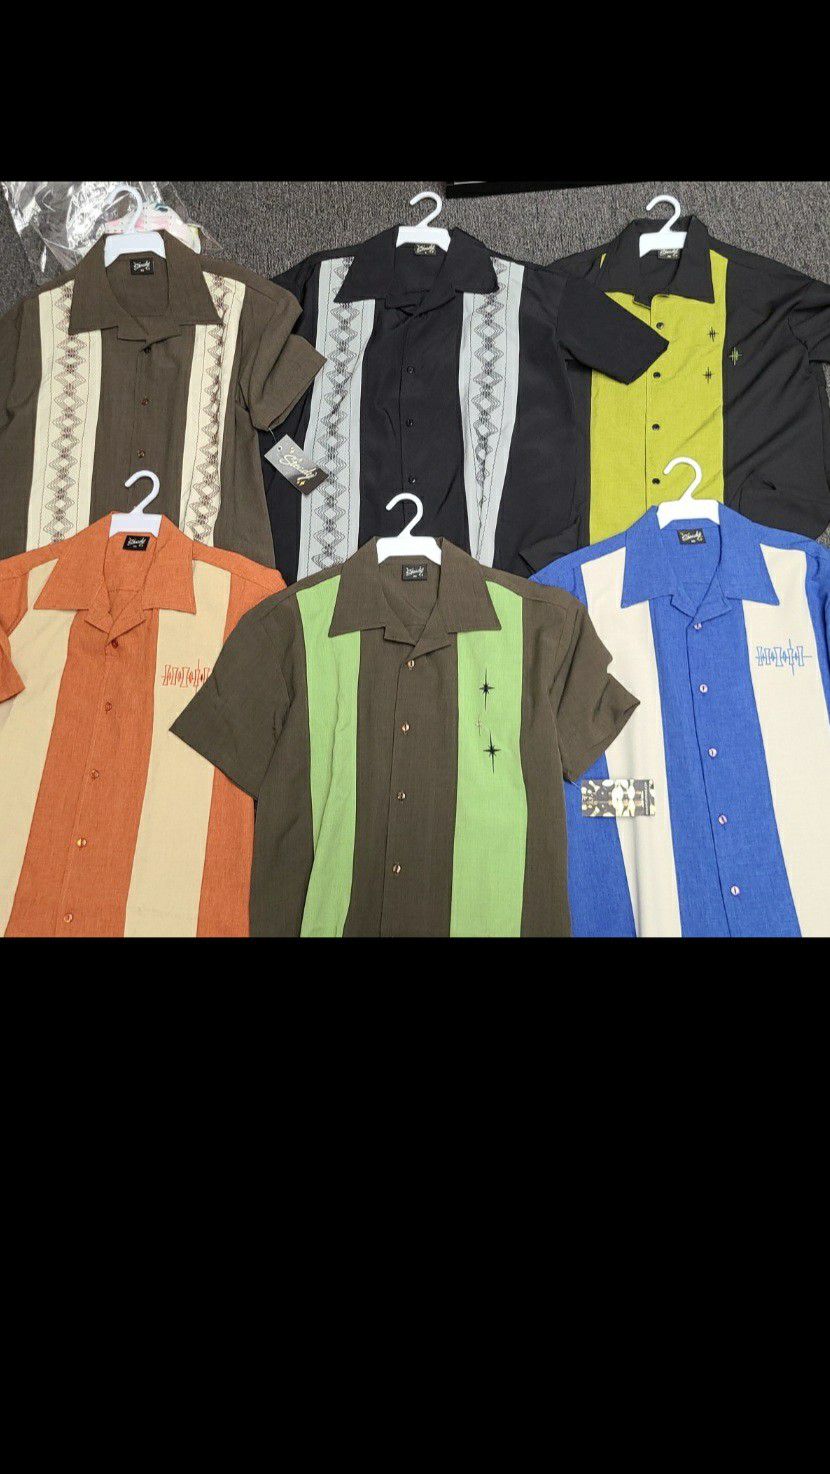 Steady clothing Men's extra small retro button up shirts